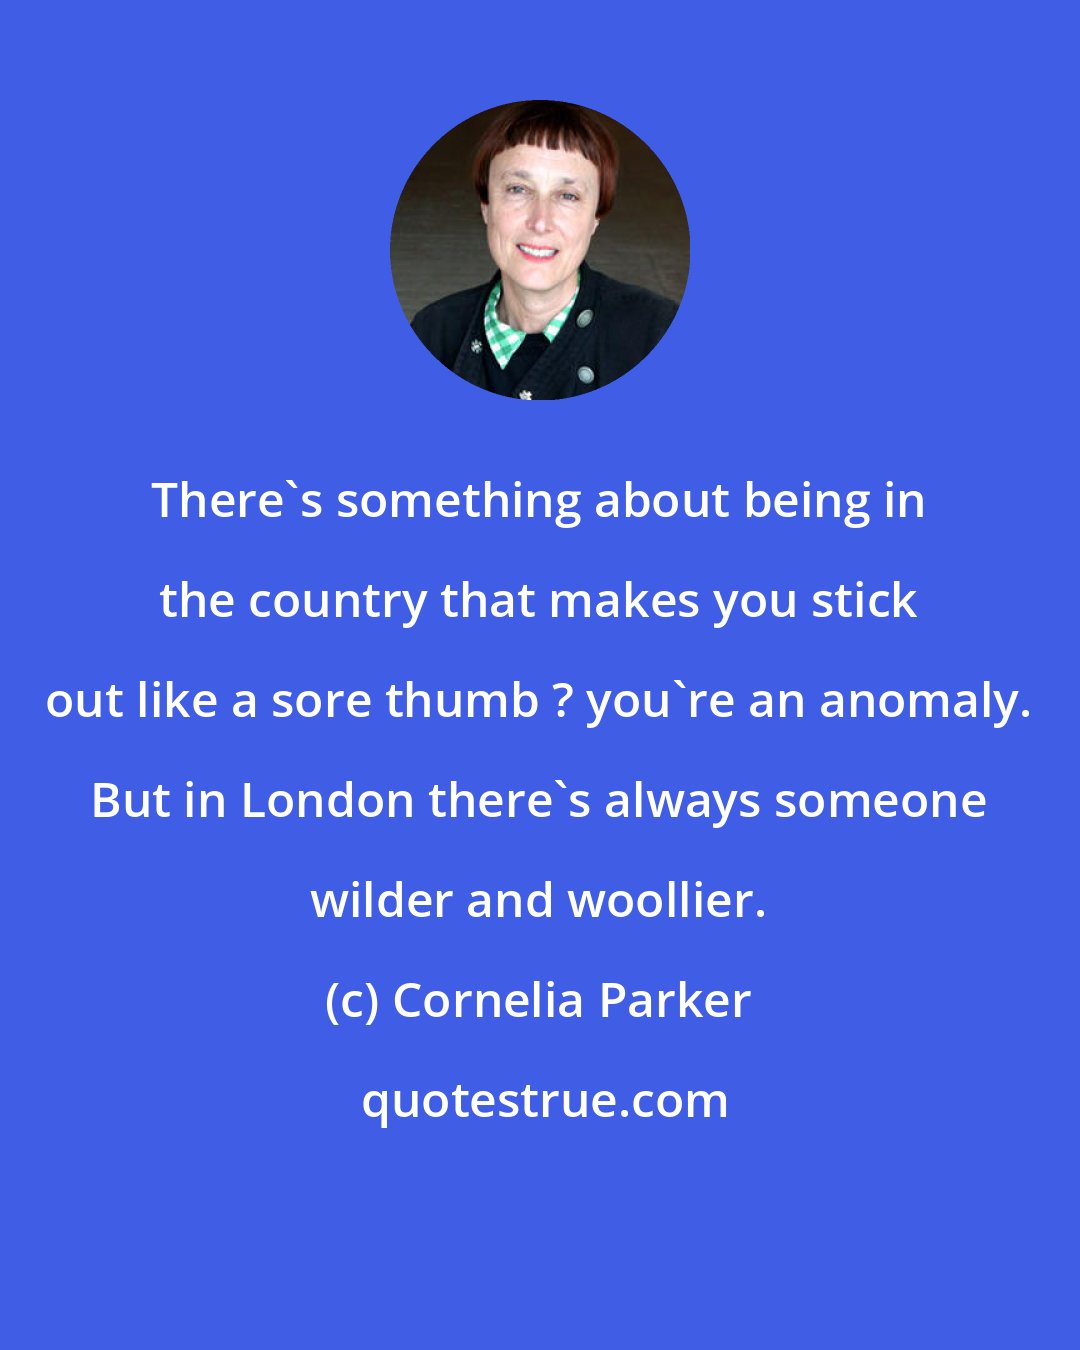 Cornelia Parker: There's something about being in the country that makes you stick out like a sore thumb ? you're an anomaly. But in London there's always someone wilder and woollier.